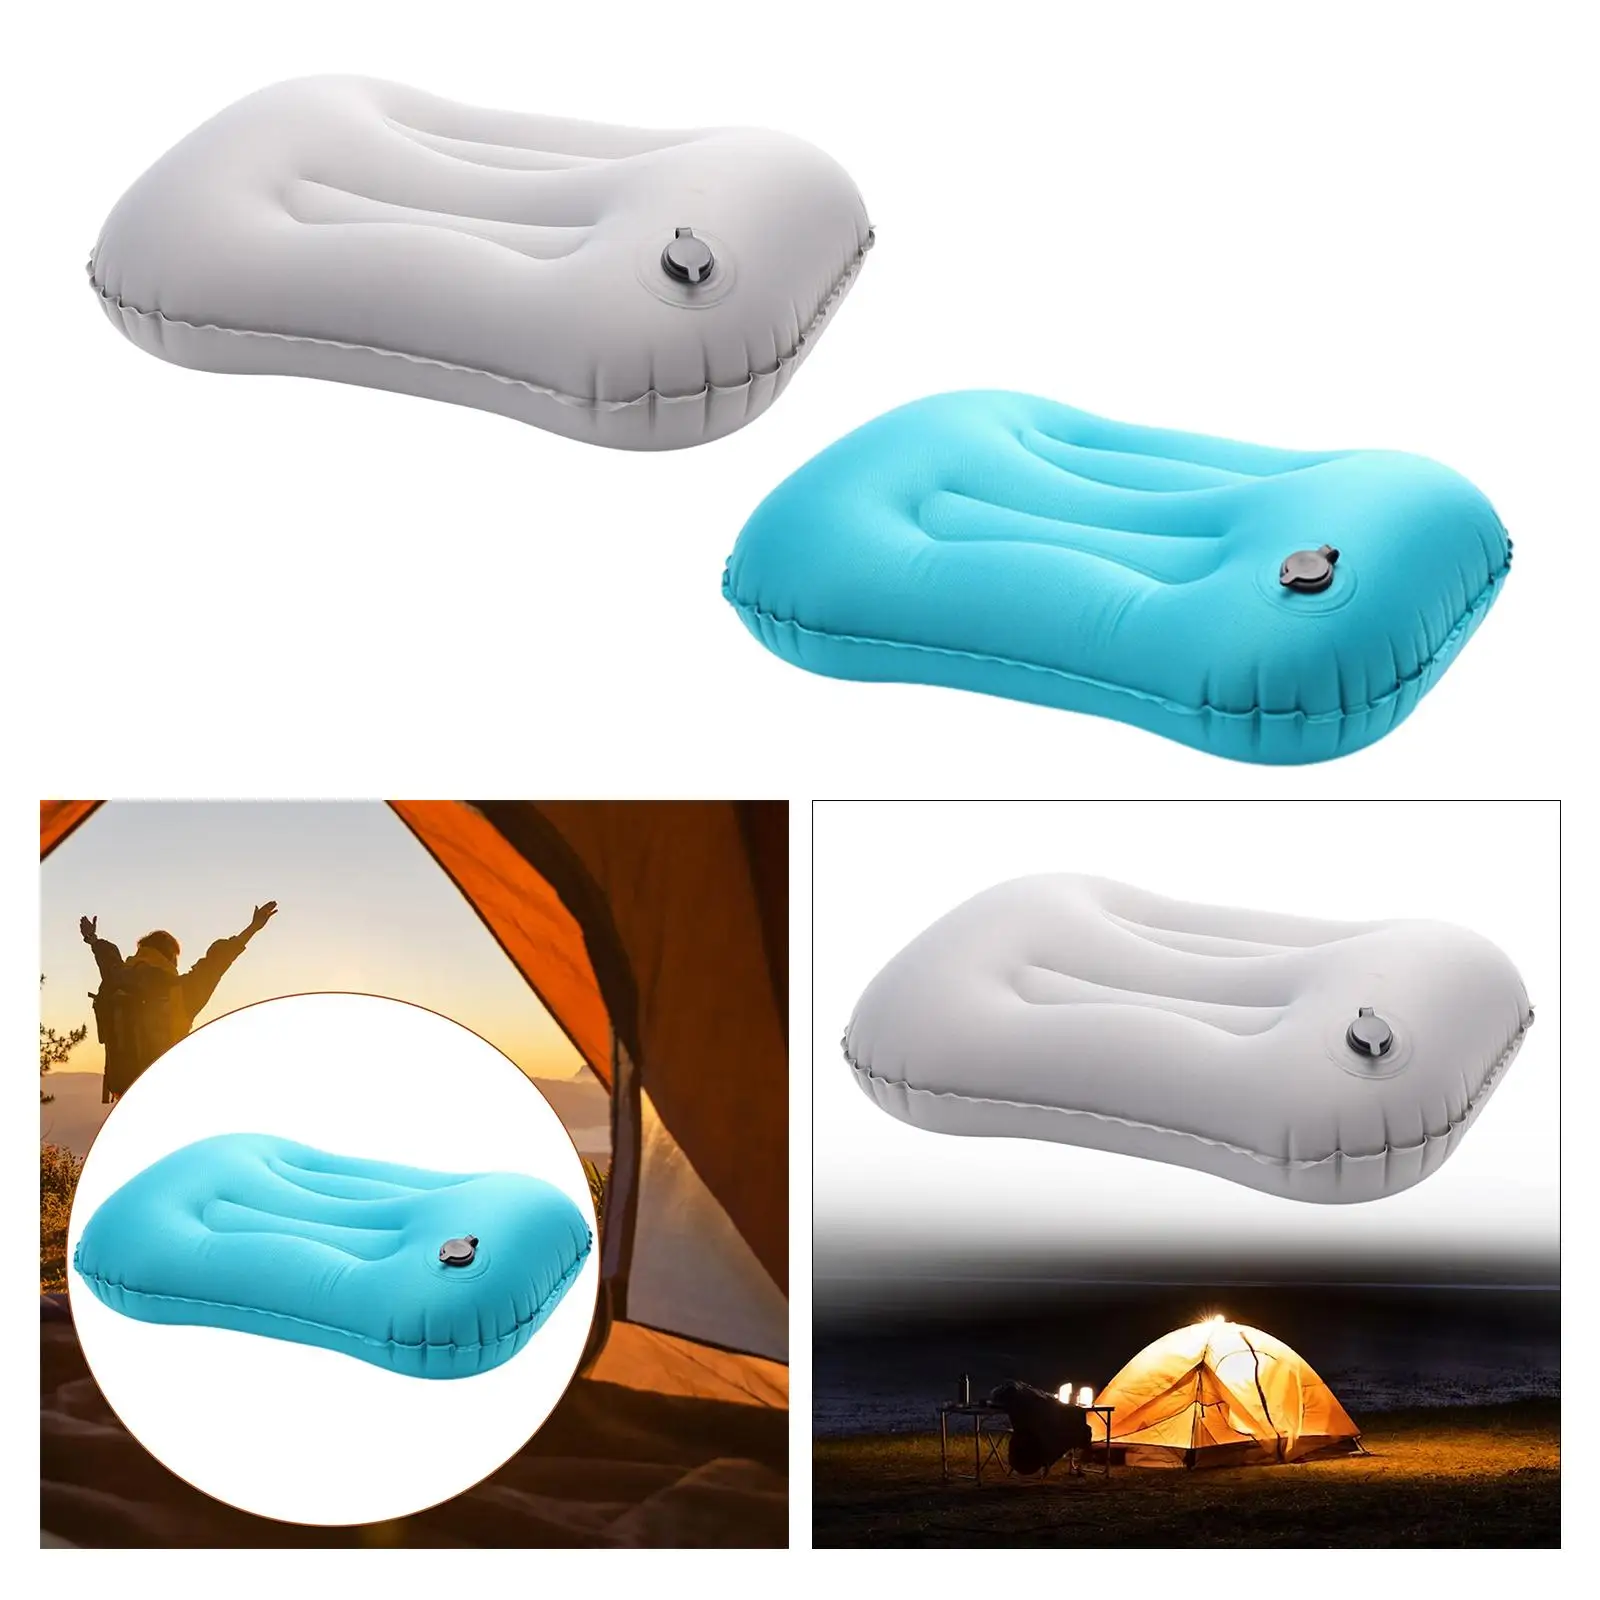 Inflatable Pillow, Compressible Pillow, Lightweight Blow up Air Pillow, Travel Pillow for Camping, Outdoor, Indoor